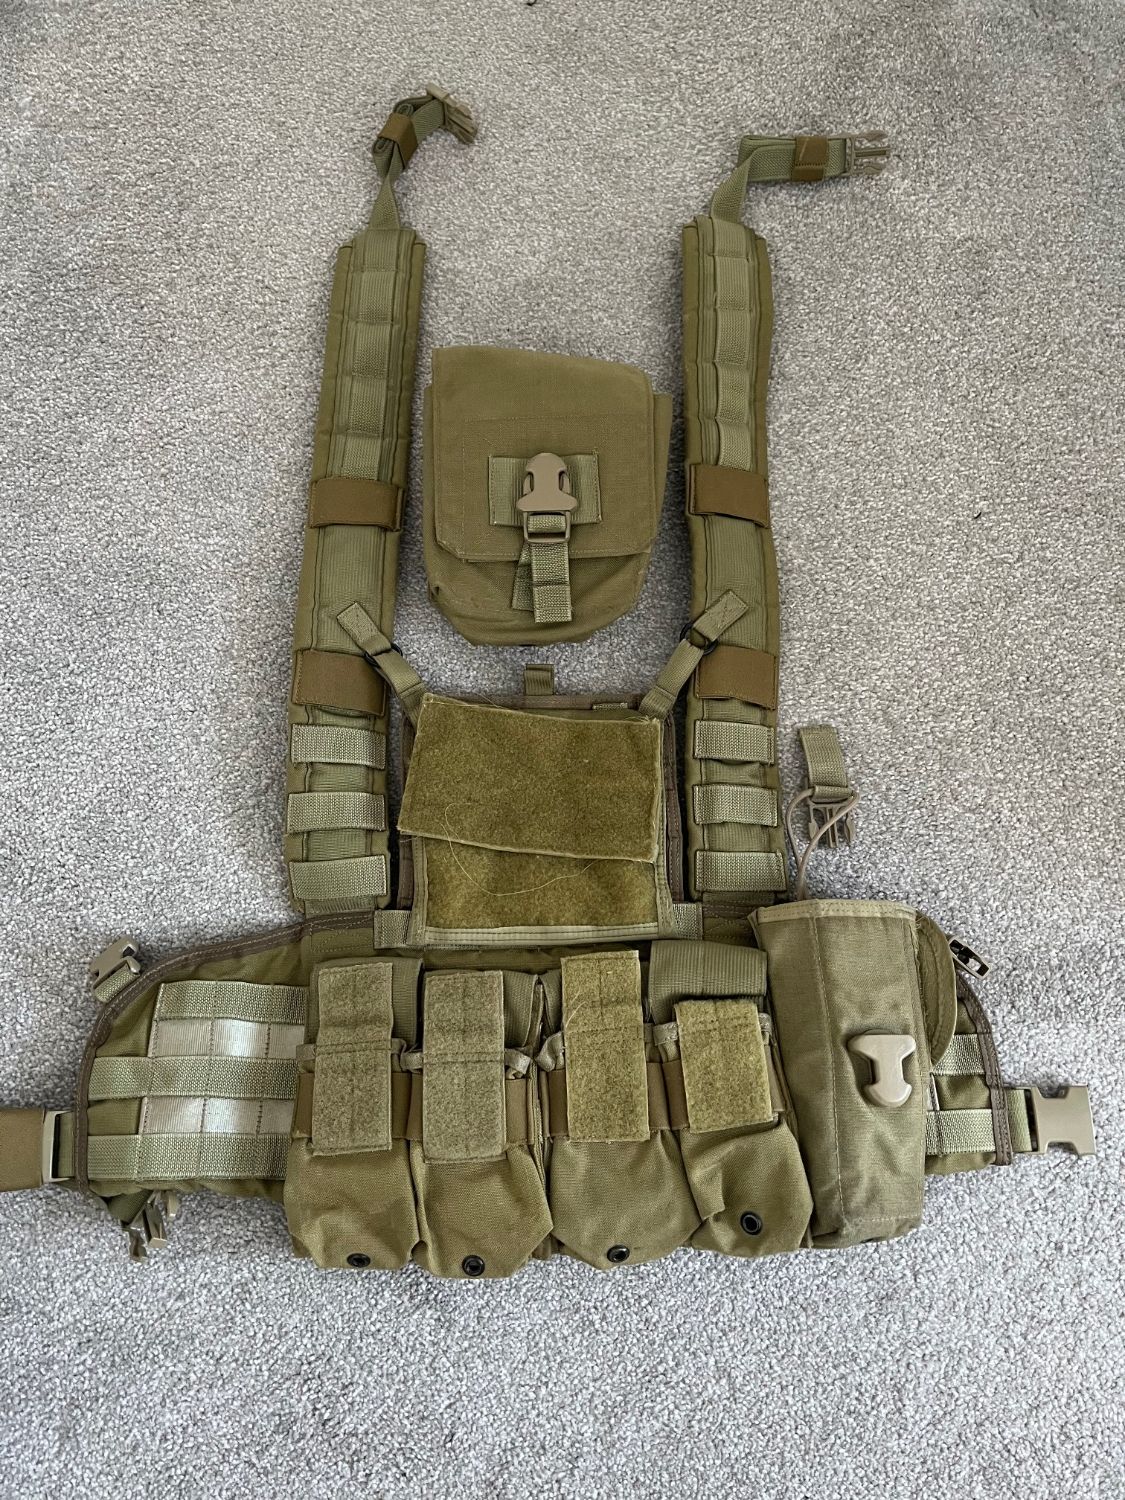 Genuine Eagle industries RRV and warbelt price drop - Gear - Airsoft ...